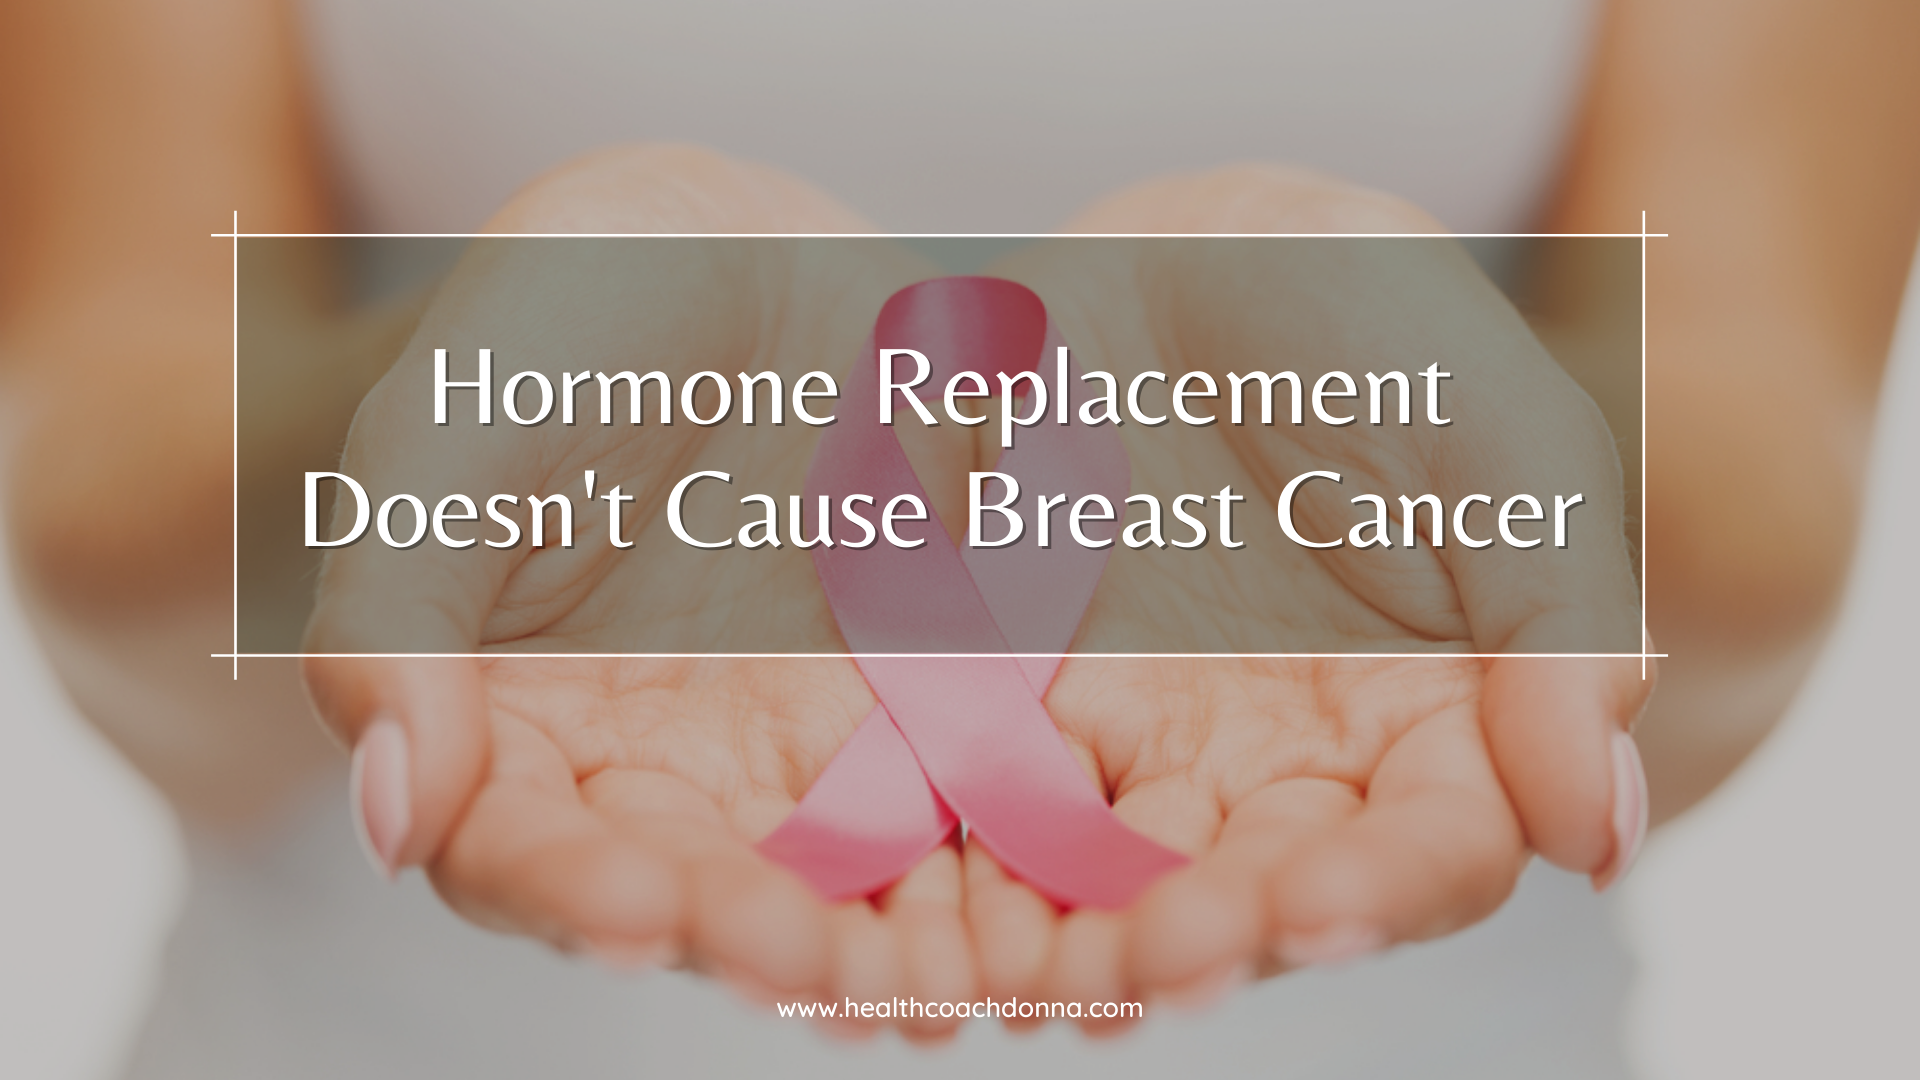 Hormone Replacement Doesn't Cause Breast Cancer!